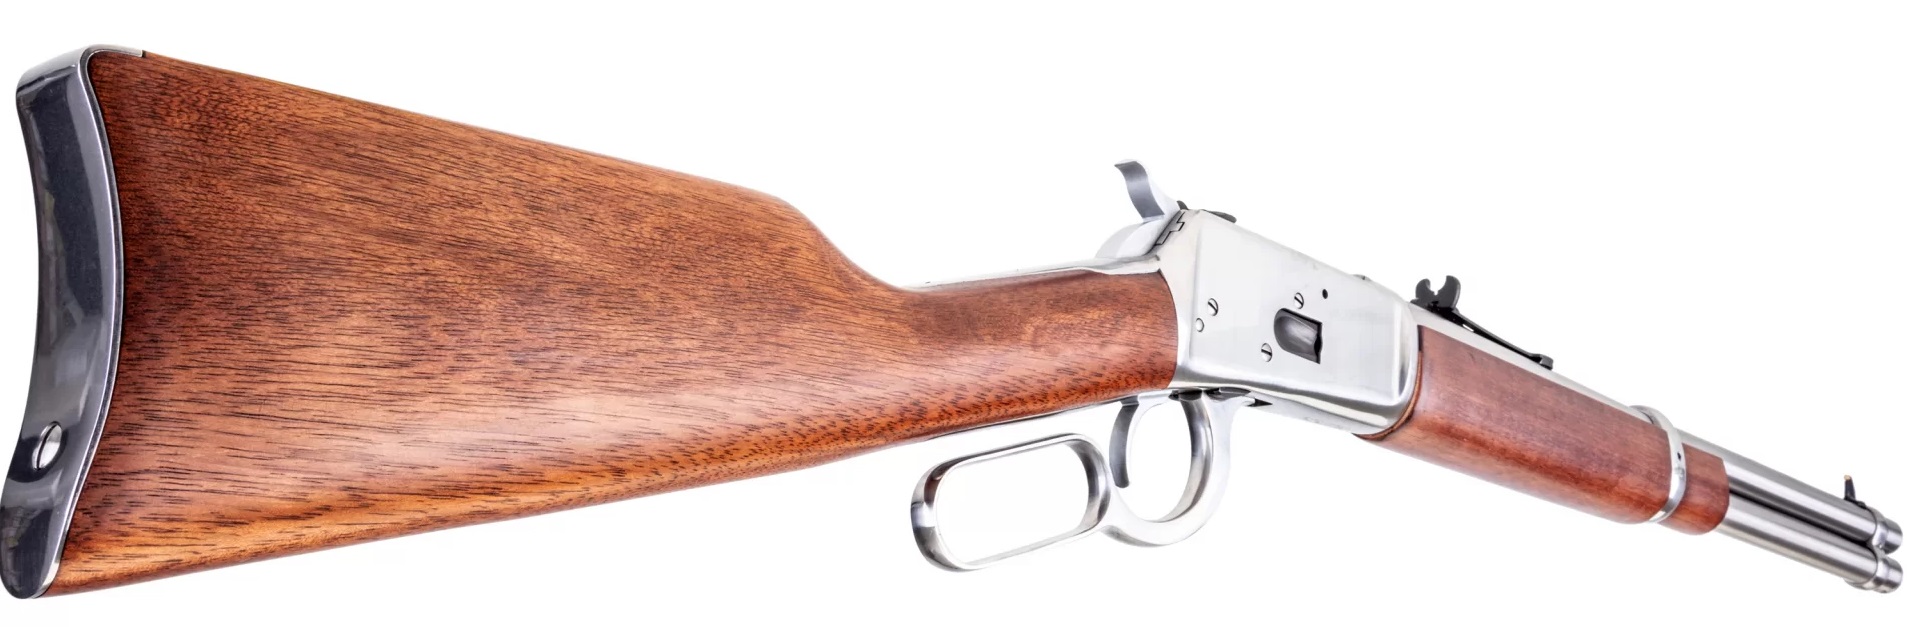 The Rossi Stainless 45 Colt